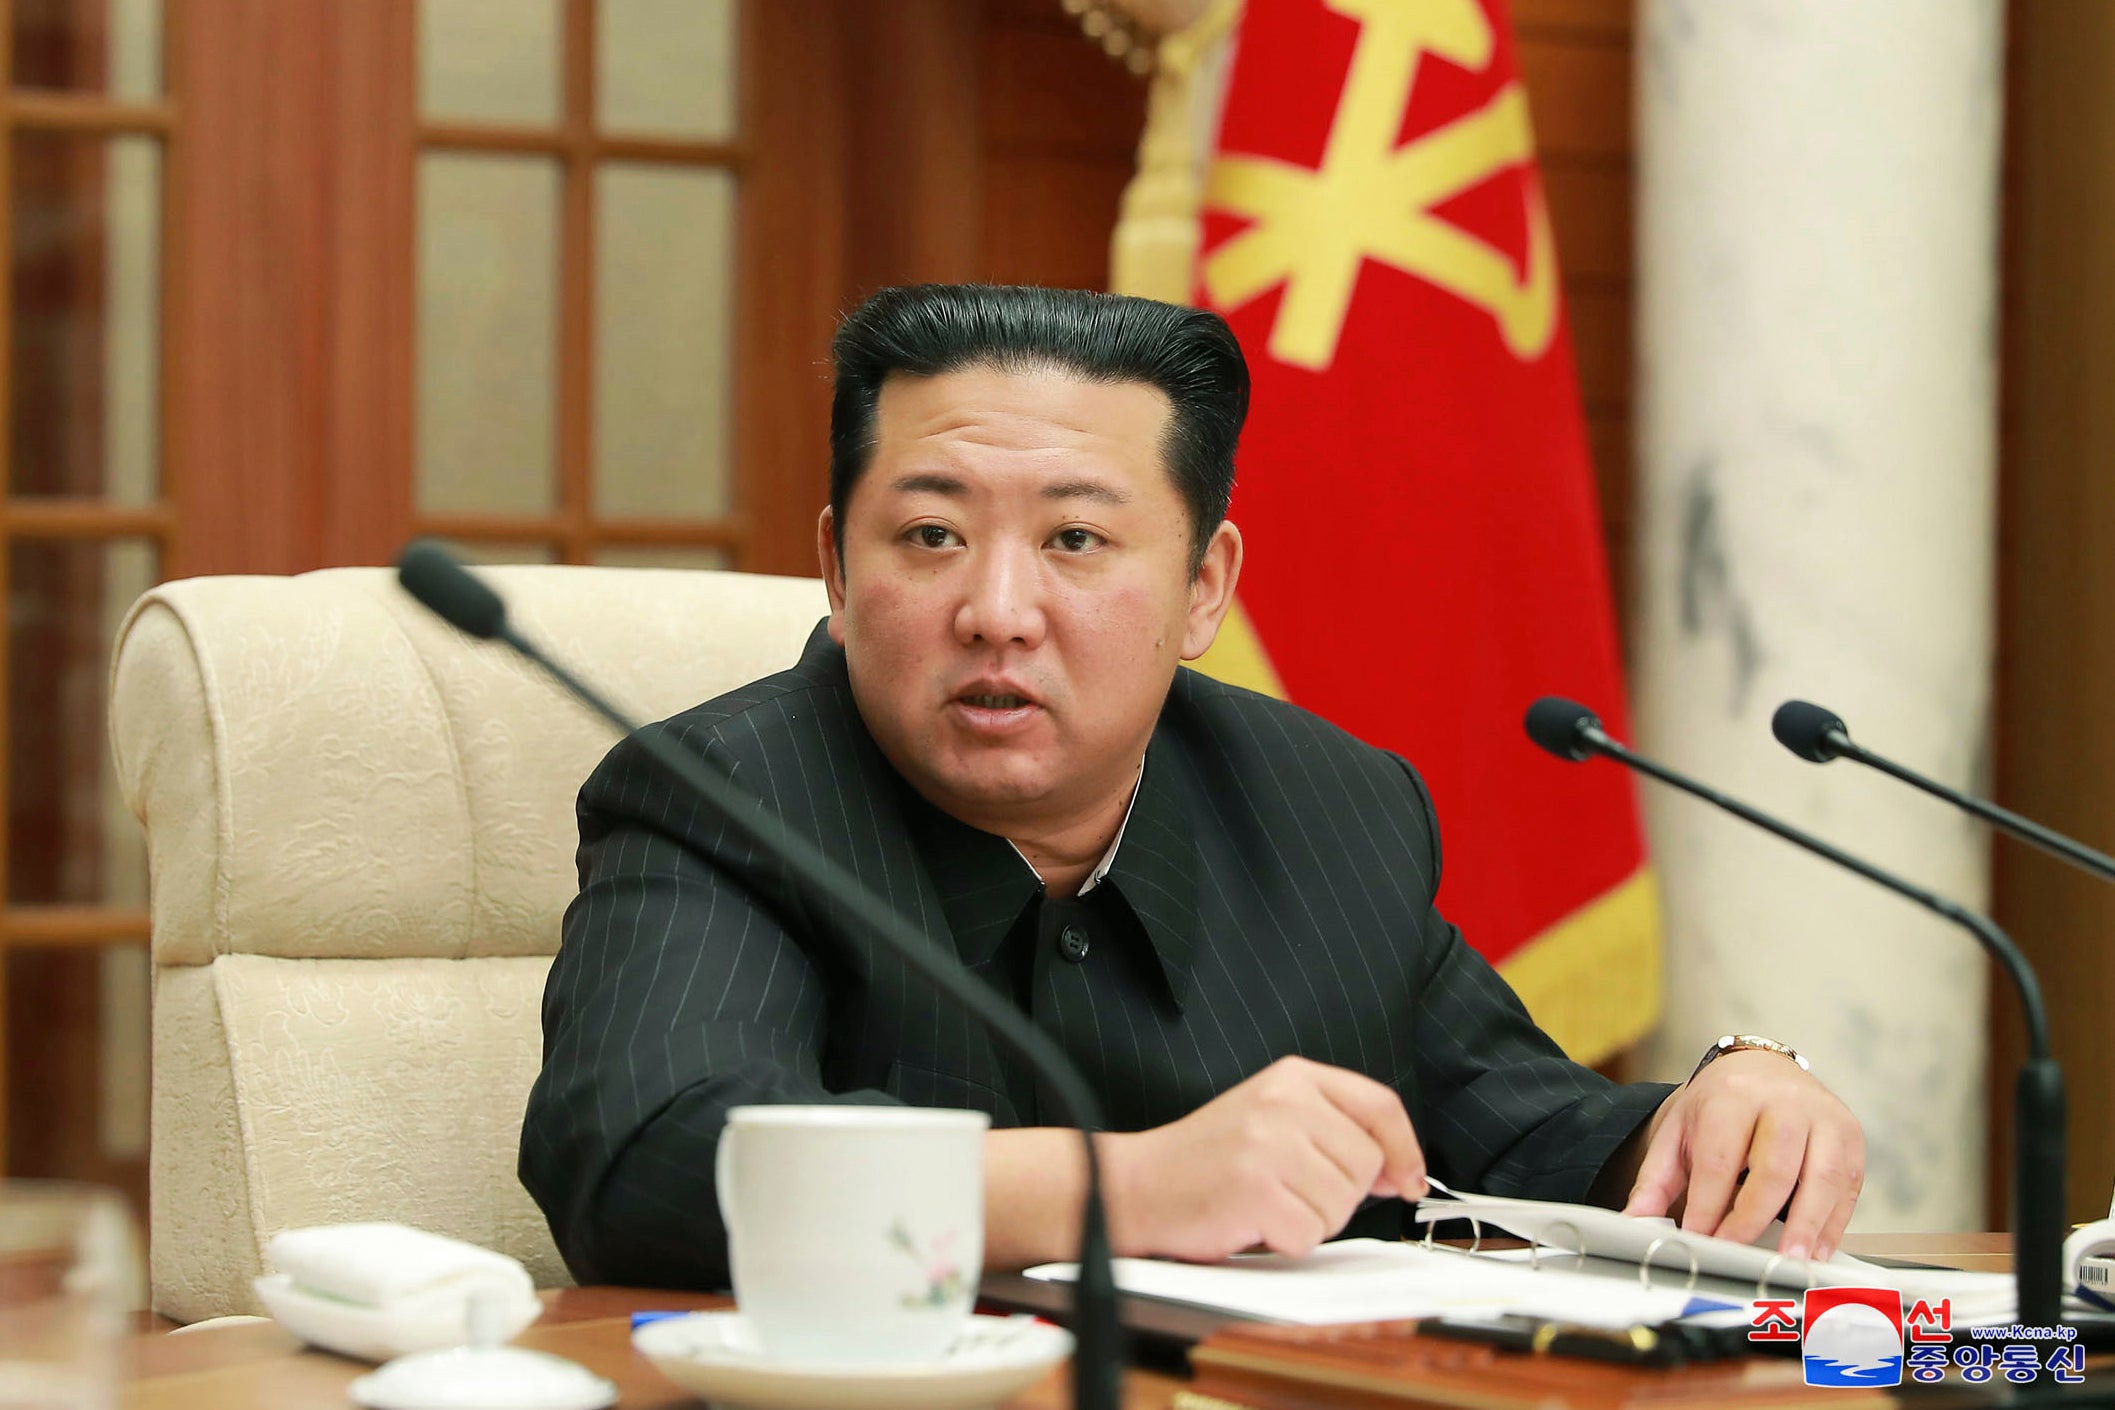 File photo: Kim Jong-un attends a ruling party meeting in January